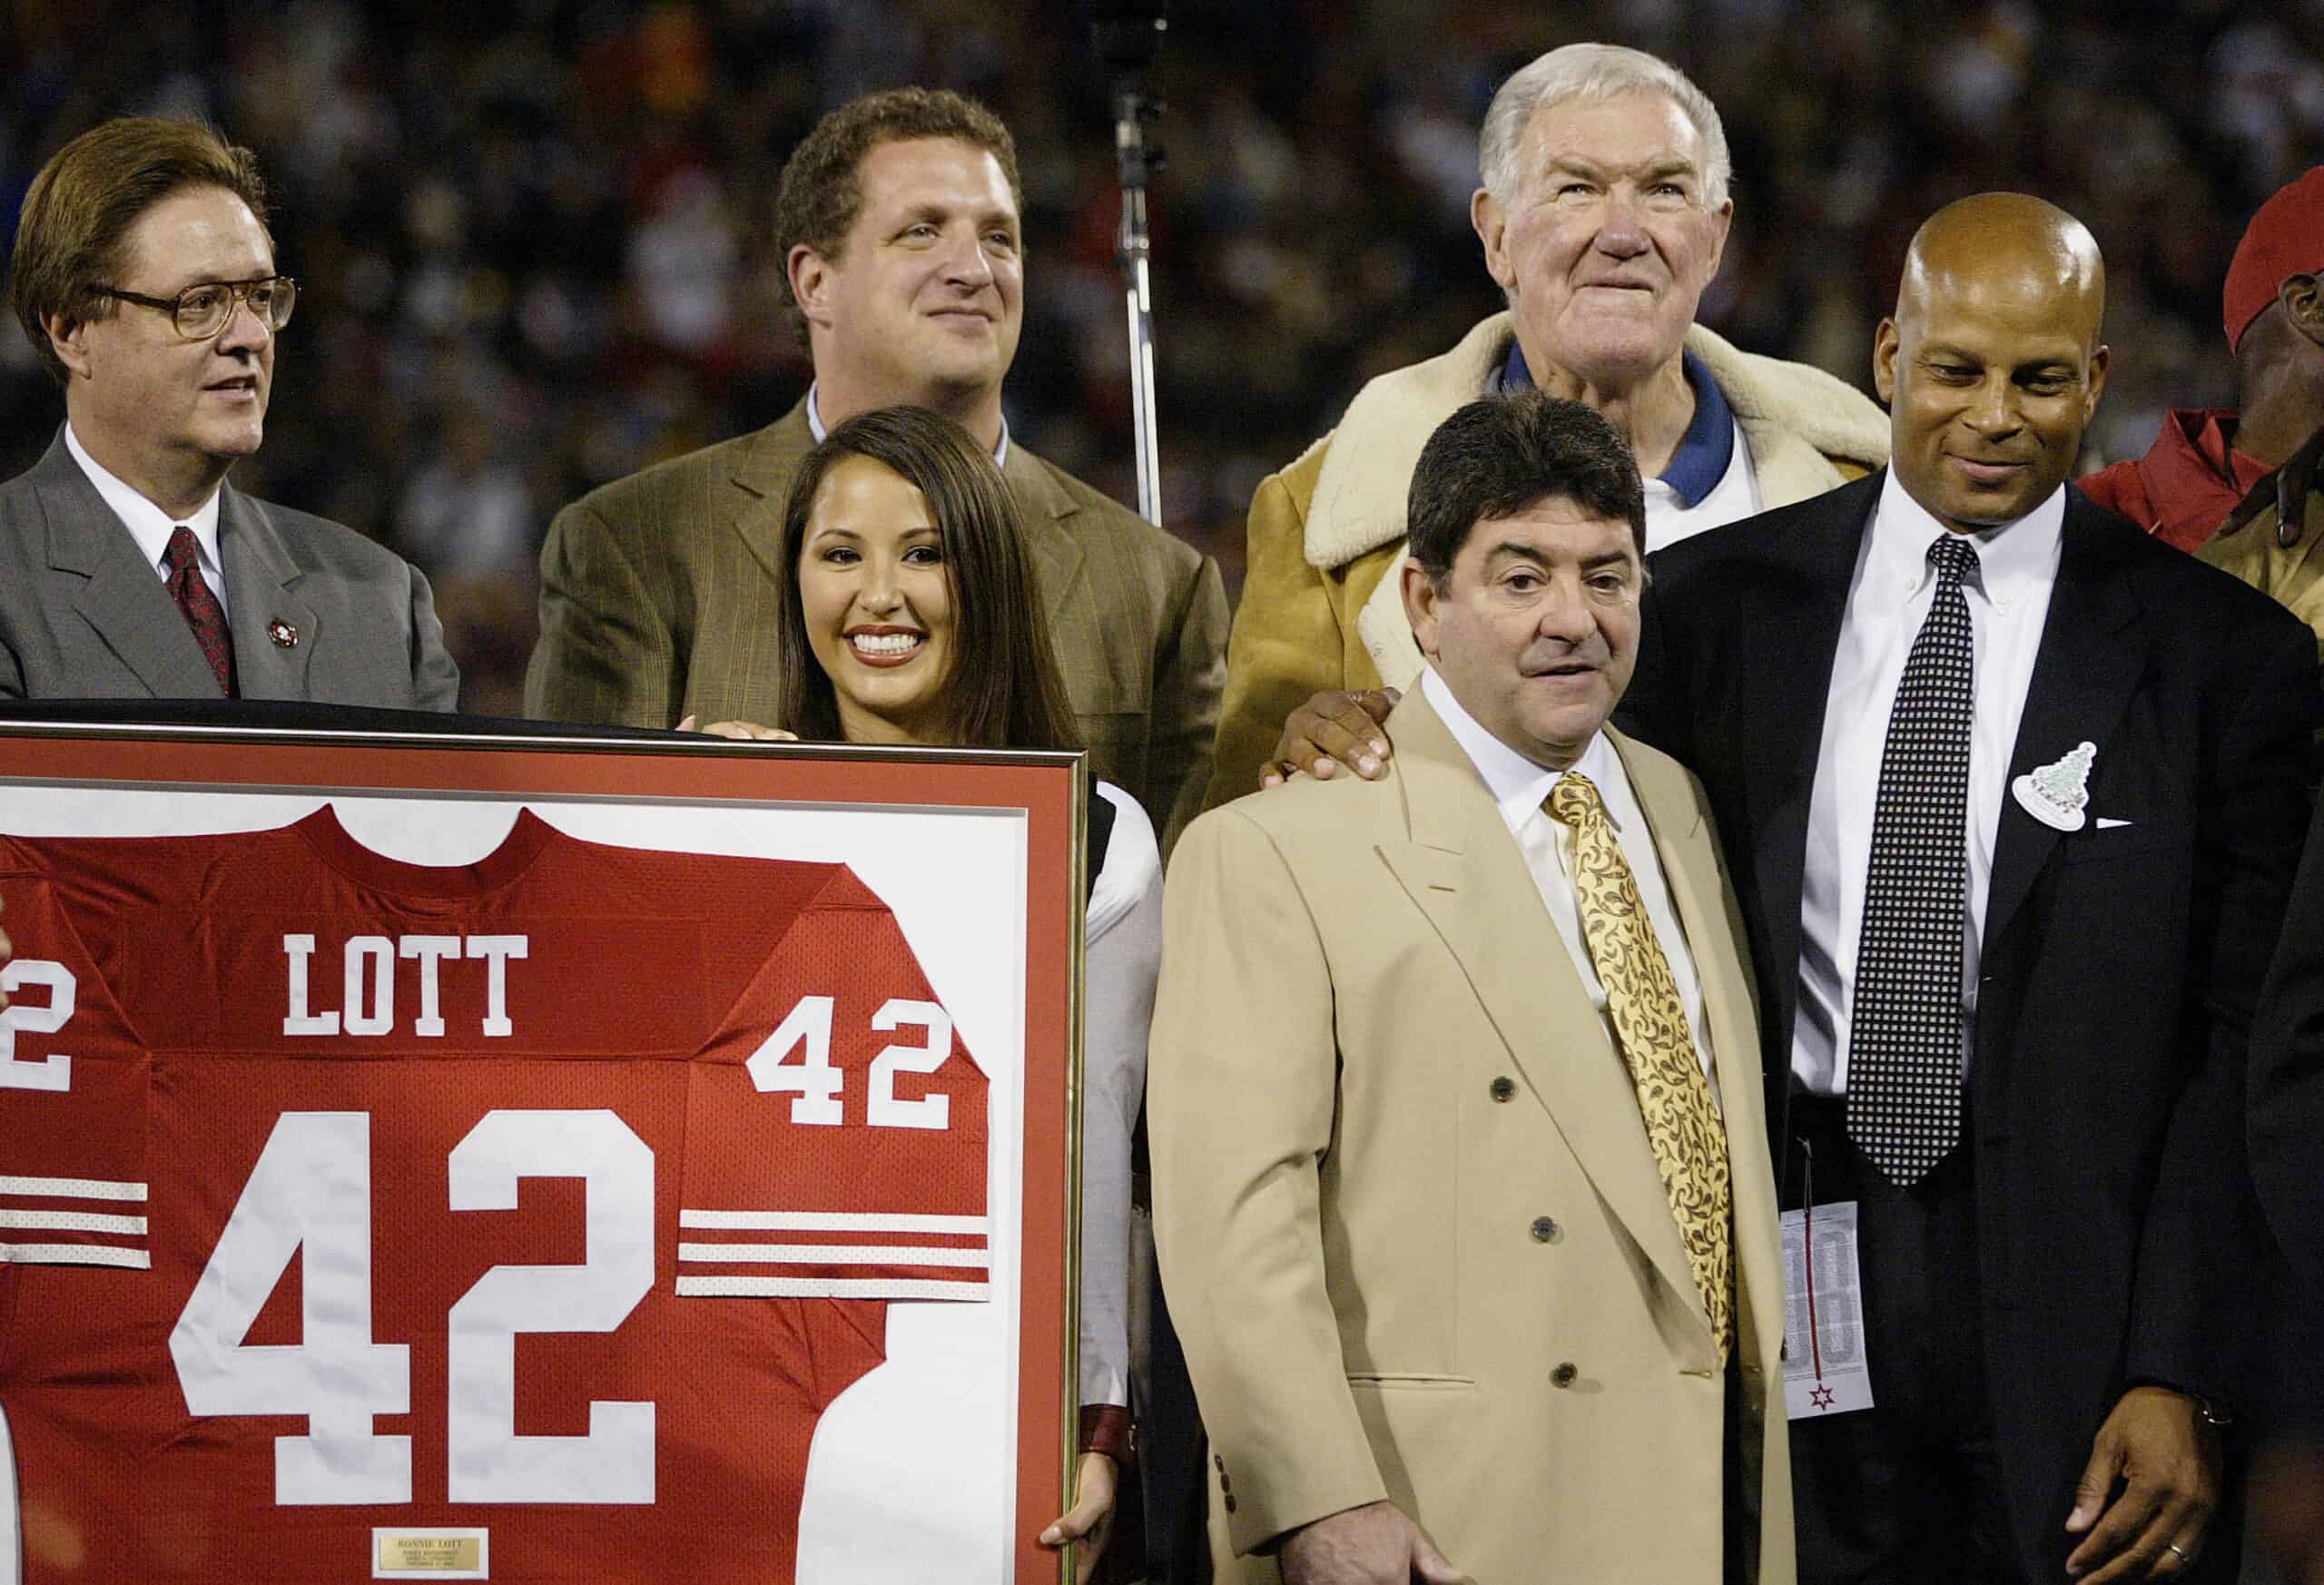 SAN FRANCISCO - NOVEMBER 17: Former San Francisco 49er Ronnie Lott (R) has his #42 jersey retired during a ceremony with former owner Ed DeBartotlo Jr. , former teammates and family at halftime during the Pittsburgh Steelers v San Francisco 49ers game on November 17, 2003 at Candlestick Park in San Francisco, California. (Photo by Jonathan Ferrey/Getty Images)